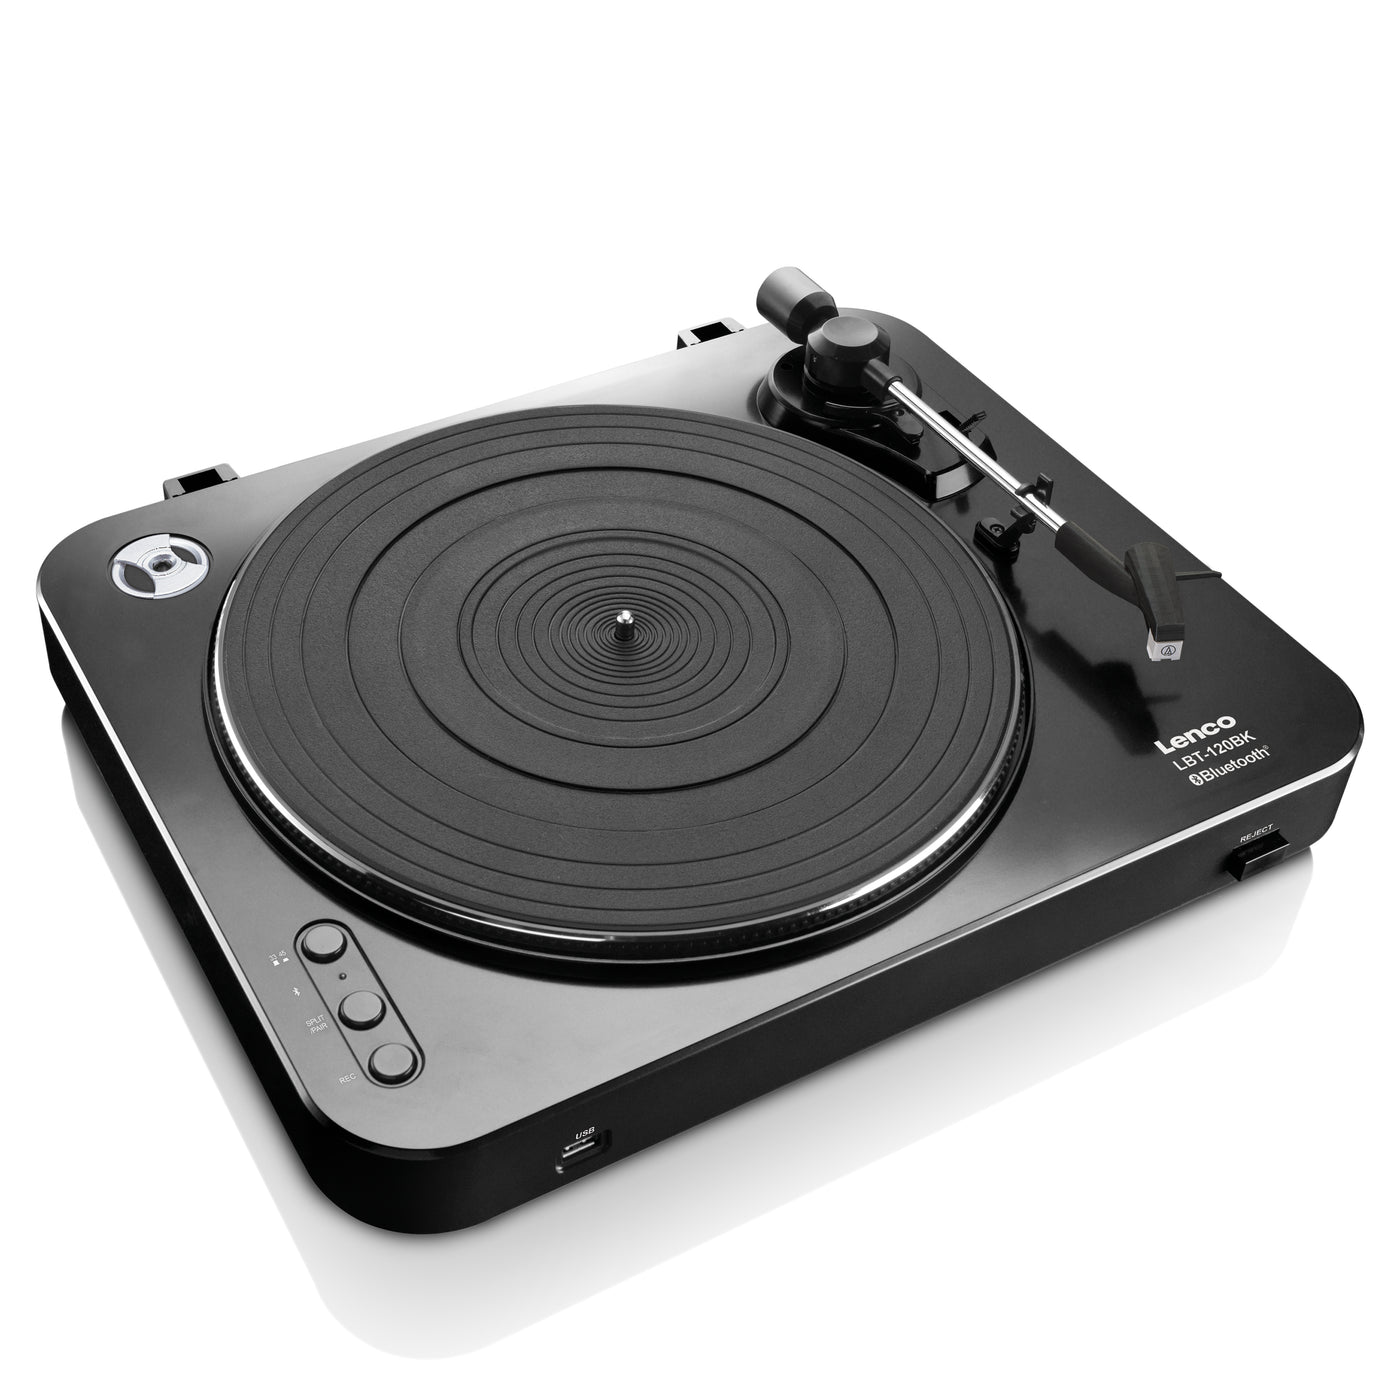 LENCO LBT-120BK - Record Player with direct encoding and Bluetooth® - Black